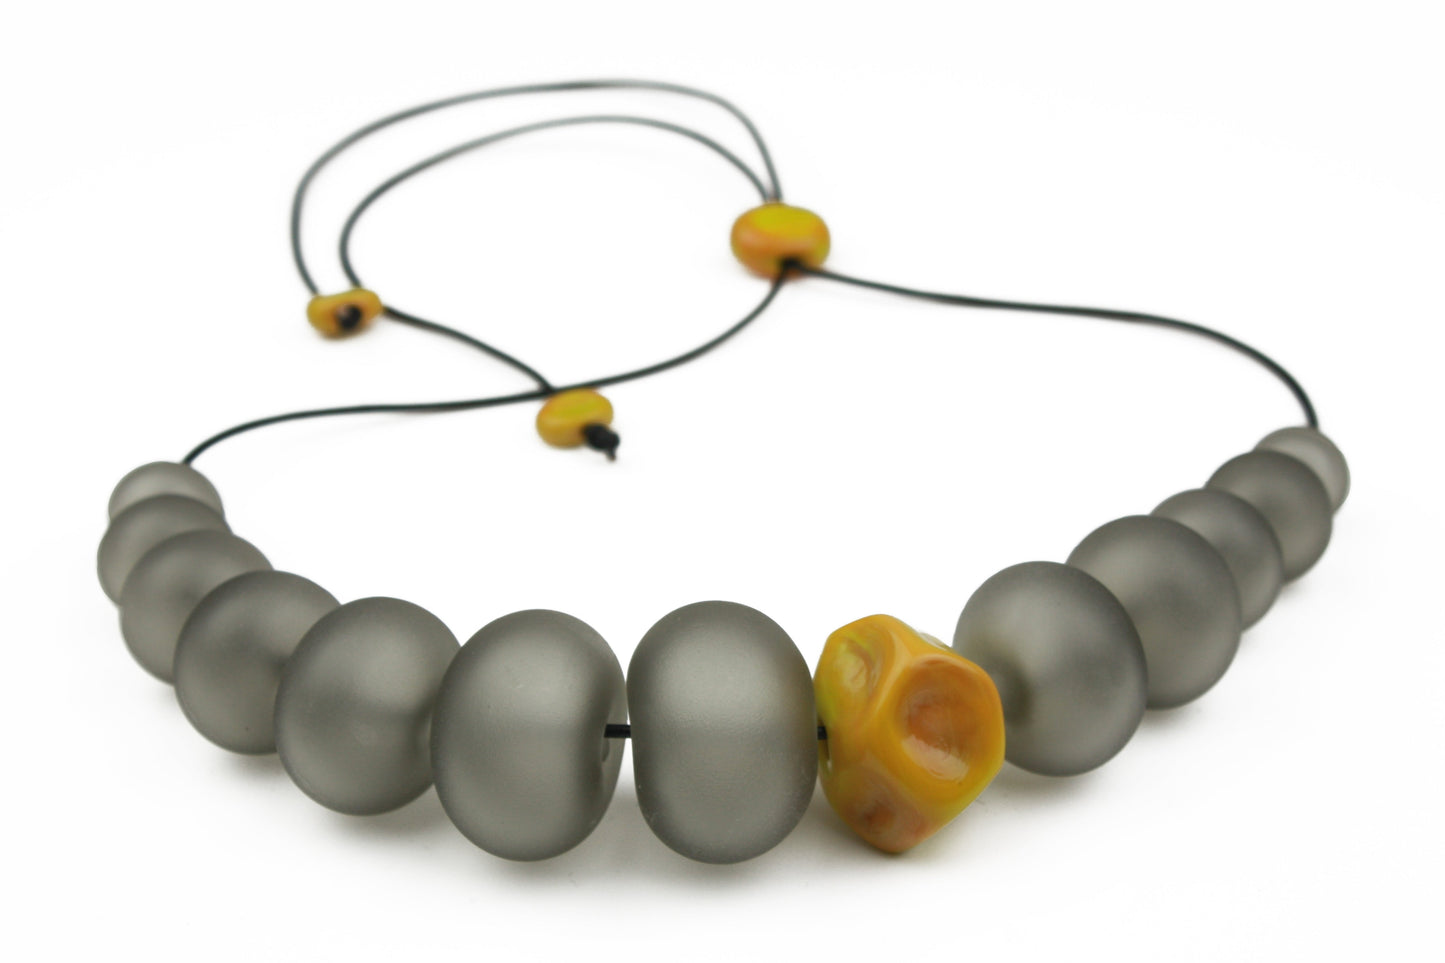 Necklace of hand blown and sandblasted hollow beads in velvety grey glass paired with a ochre yellow glass nugget bead and strung on adjustable leather